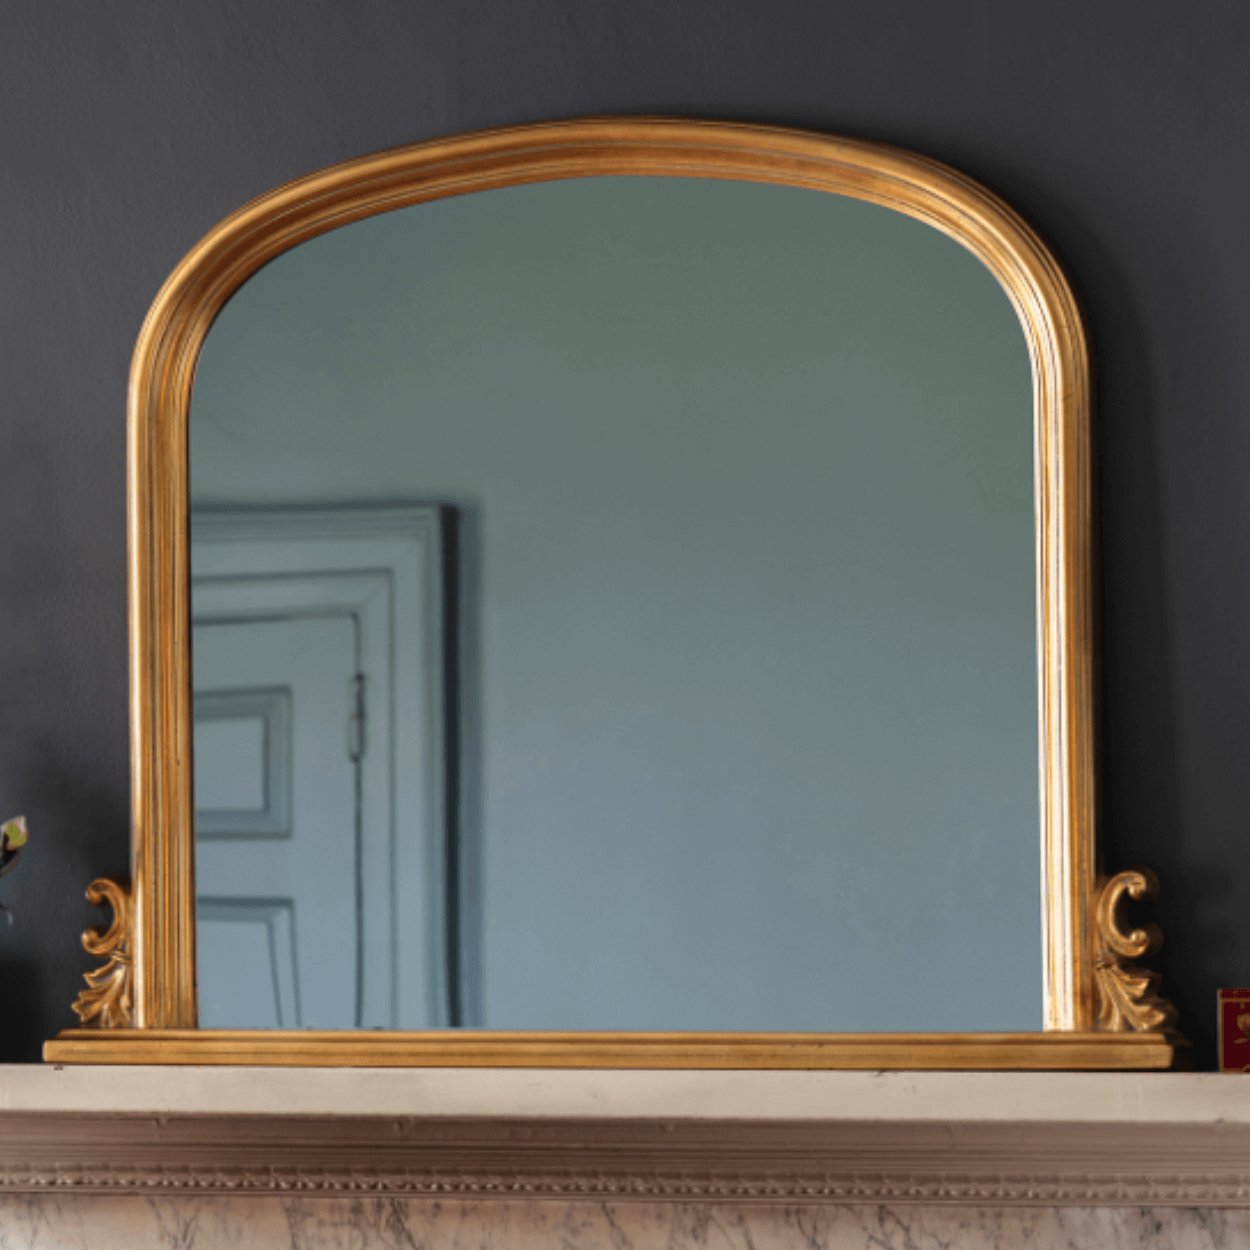 thornby gold arched mirror sitting on top of fireplace mantel